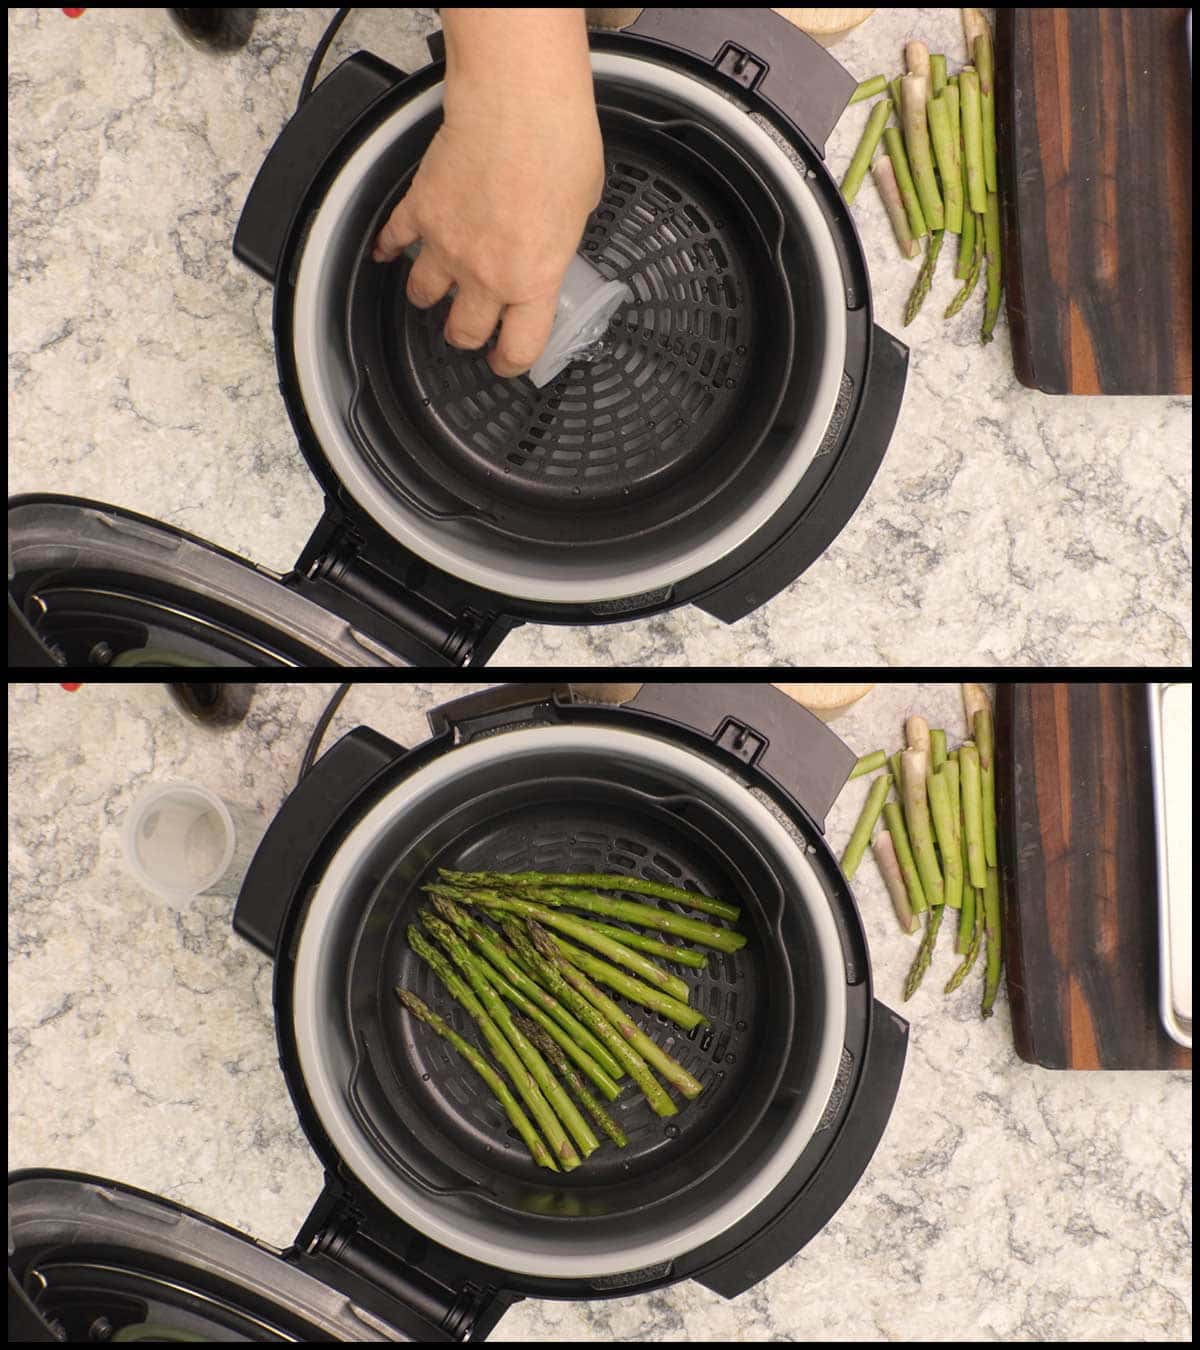 putting water in the inner pot and placing asparagus in basket of Foodi.